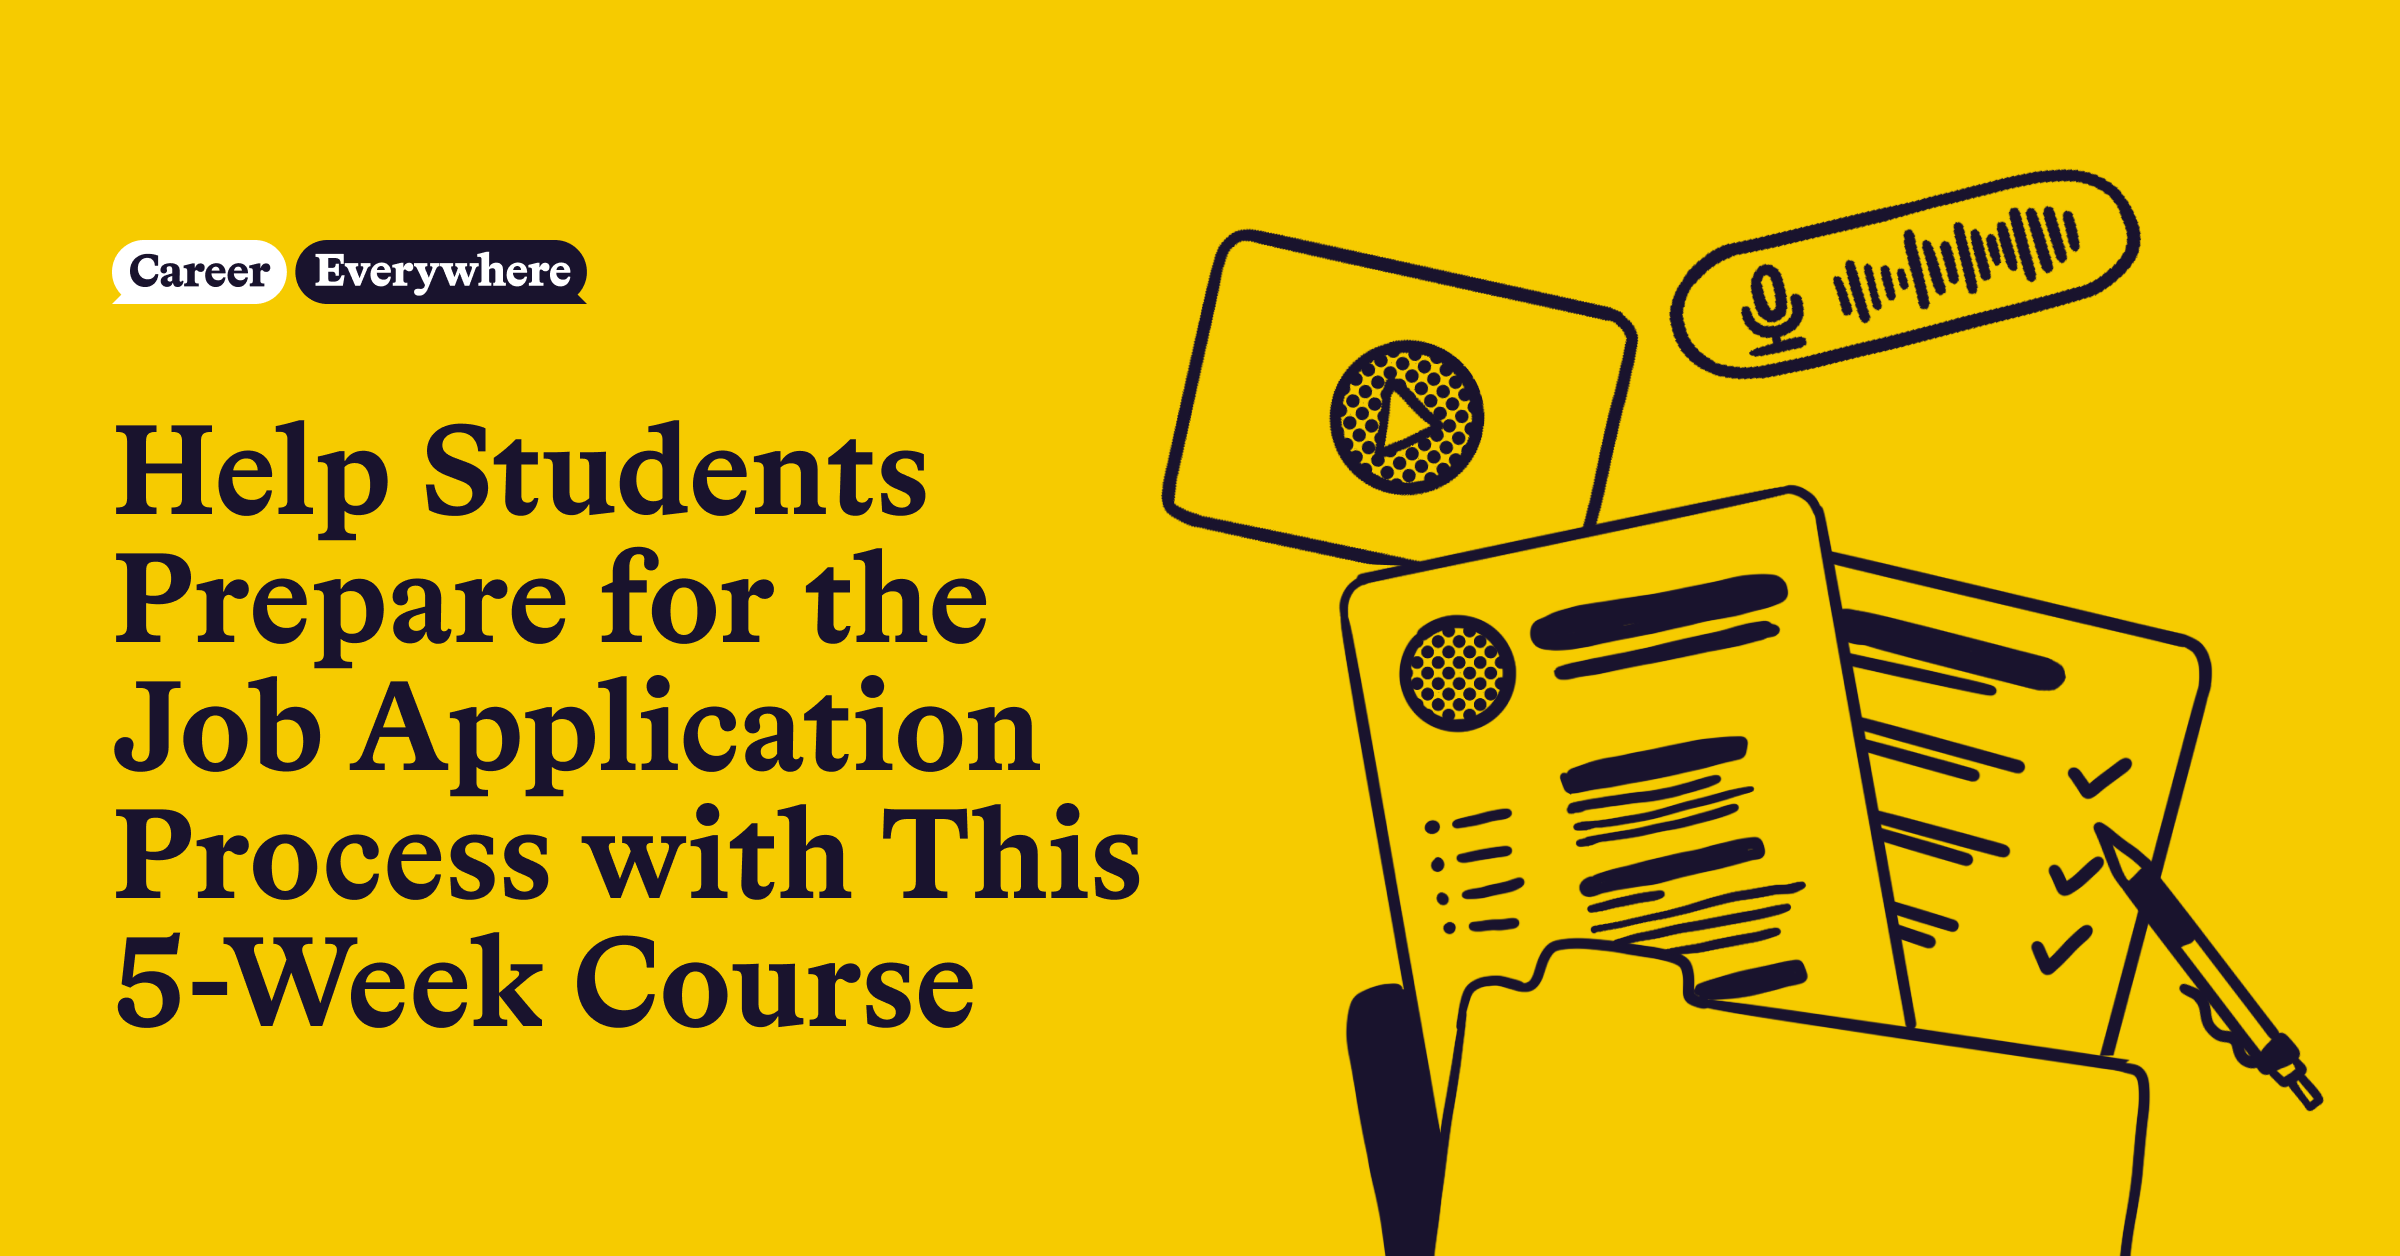 Help Students Prepare for the Job Application Process with This 5-Week Course